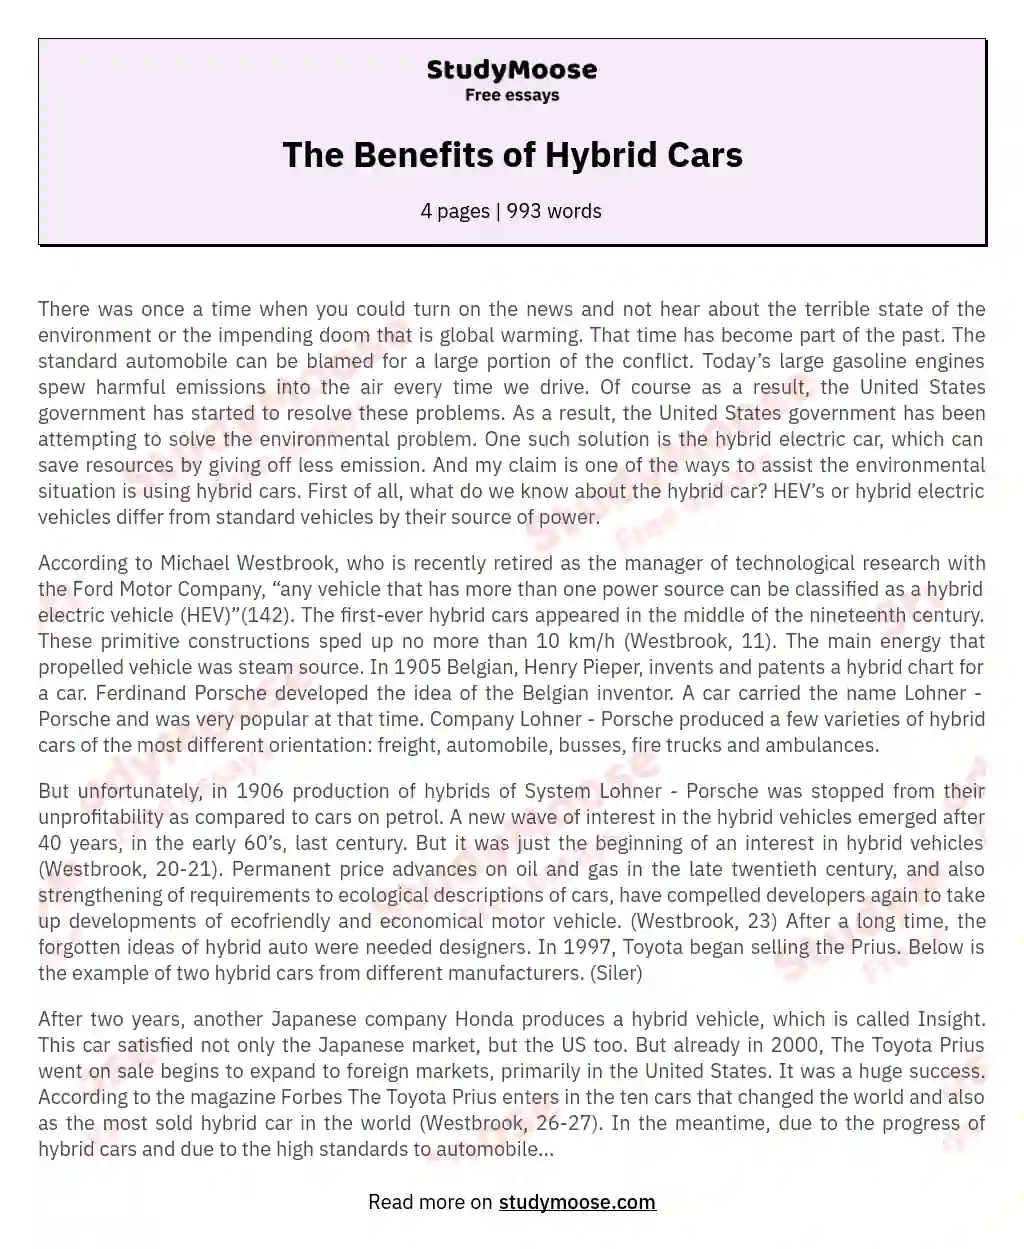 The Benefits of Hybrid Cars